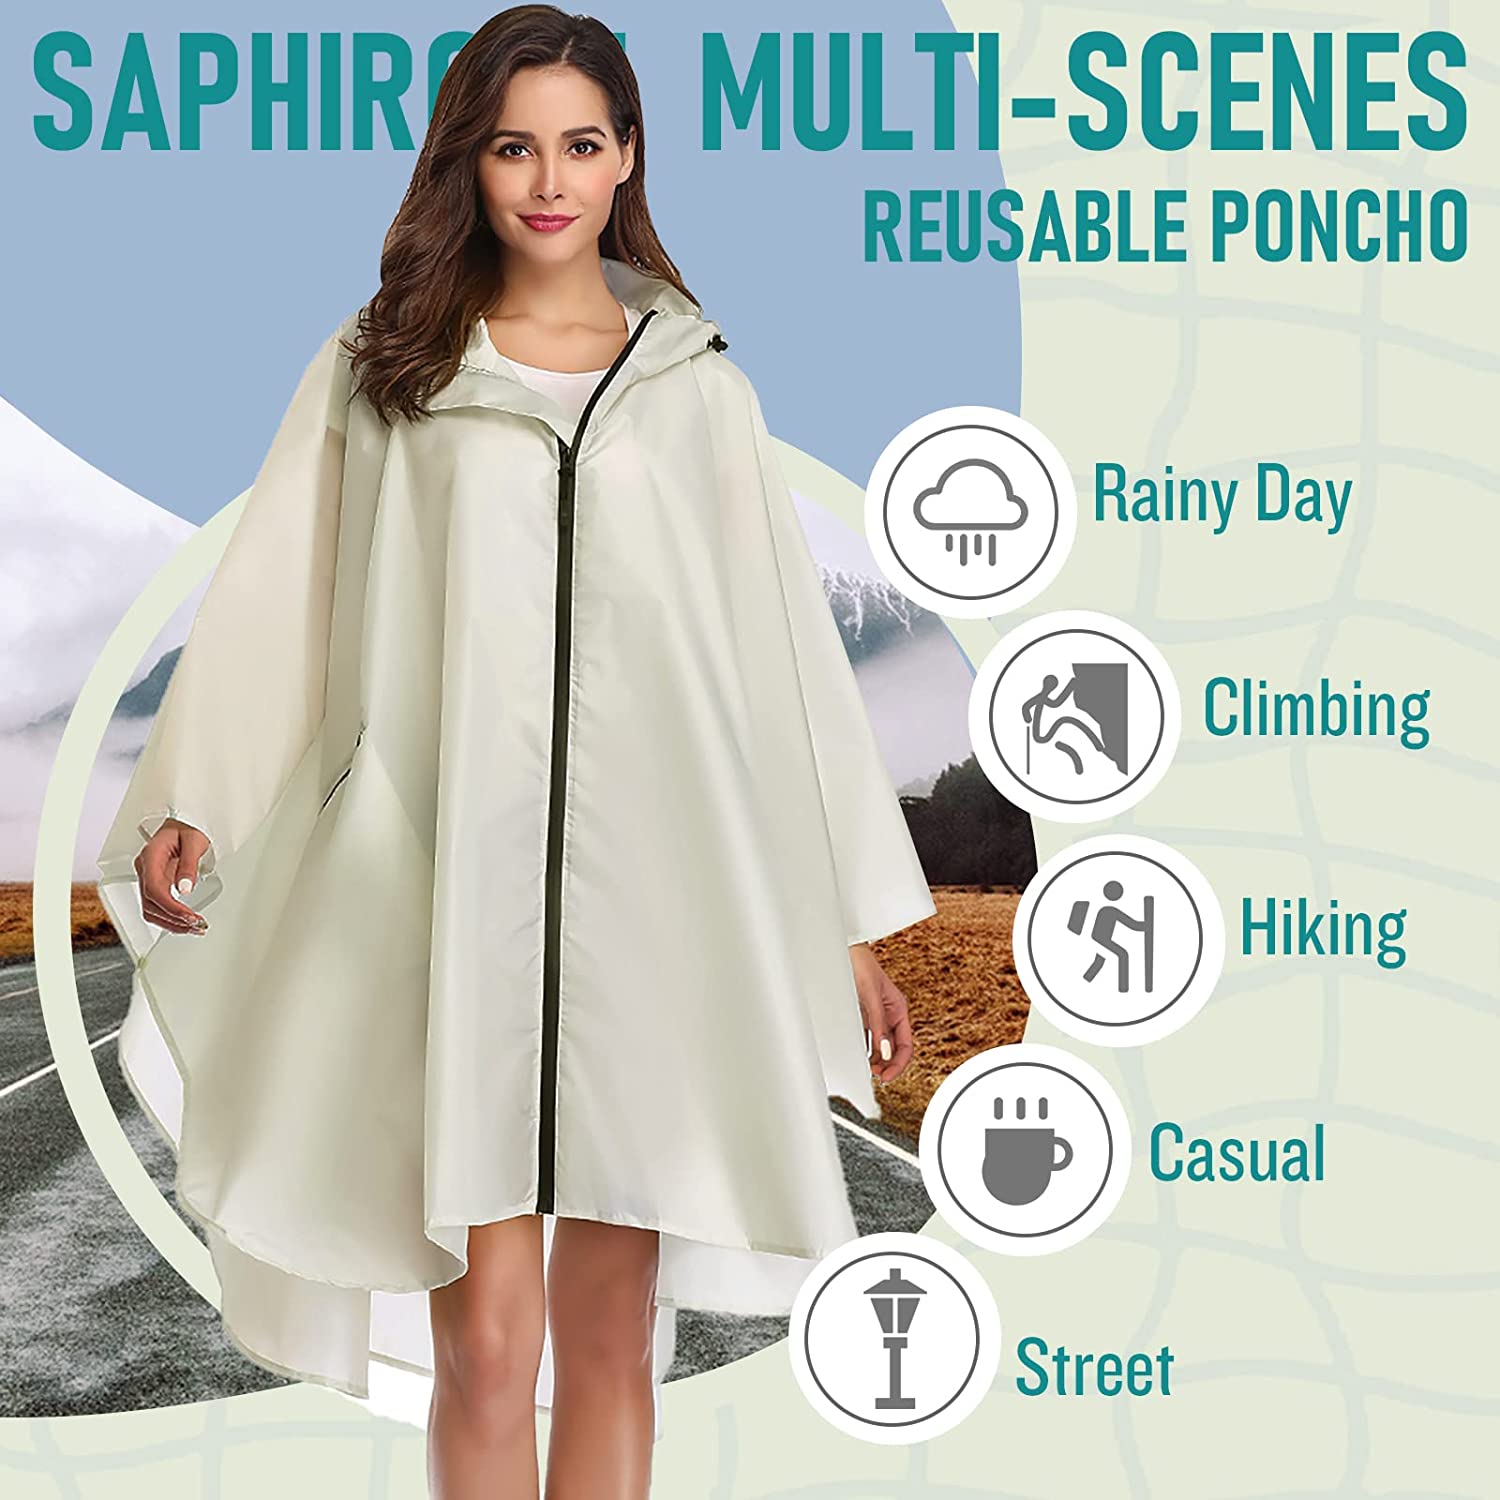 SaphiRose Rain Poncho Jacket Coat Hooded for Adults with Pockets